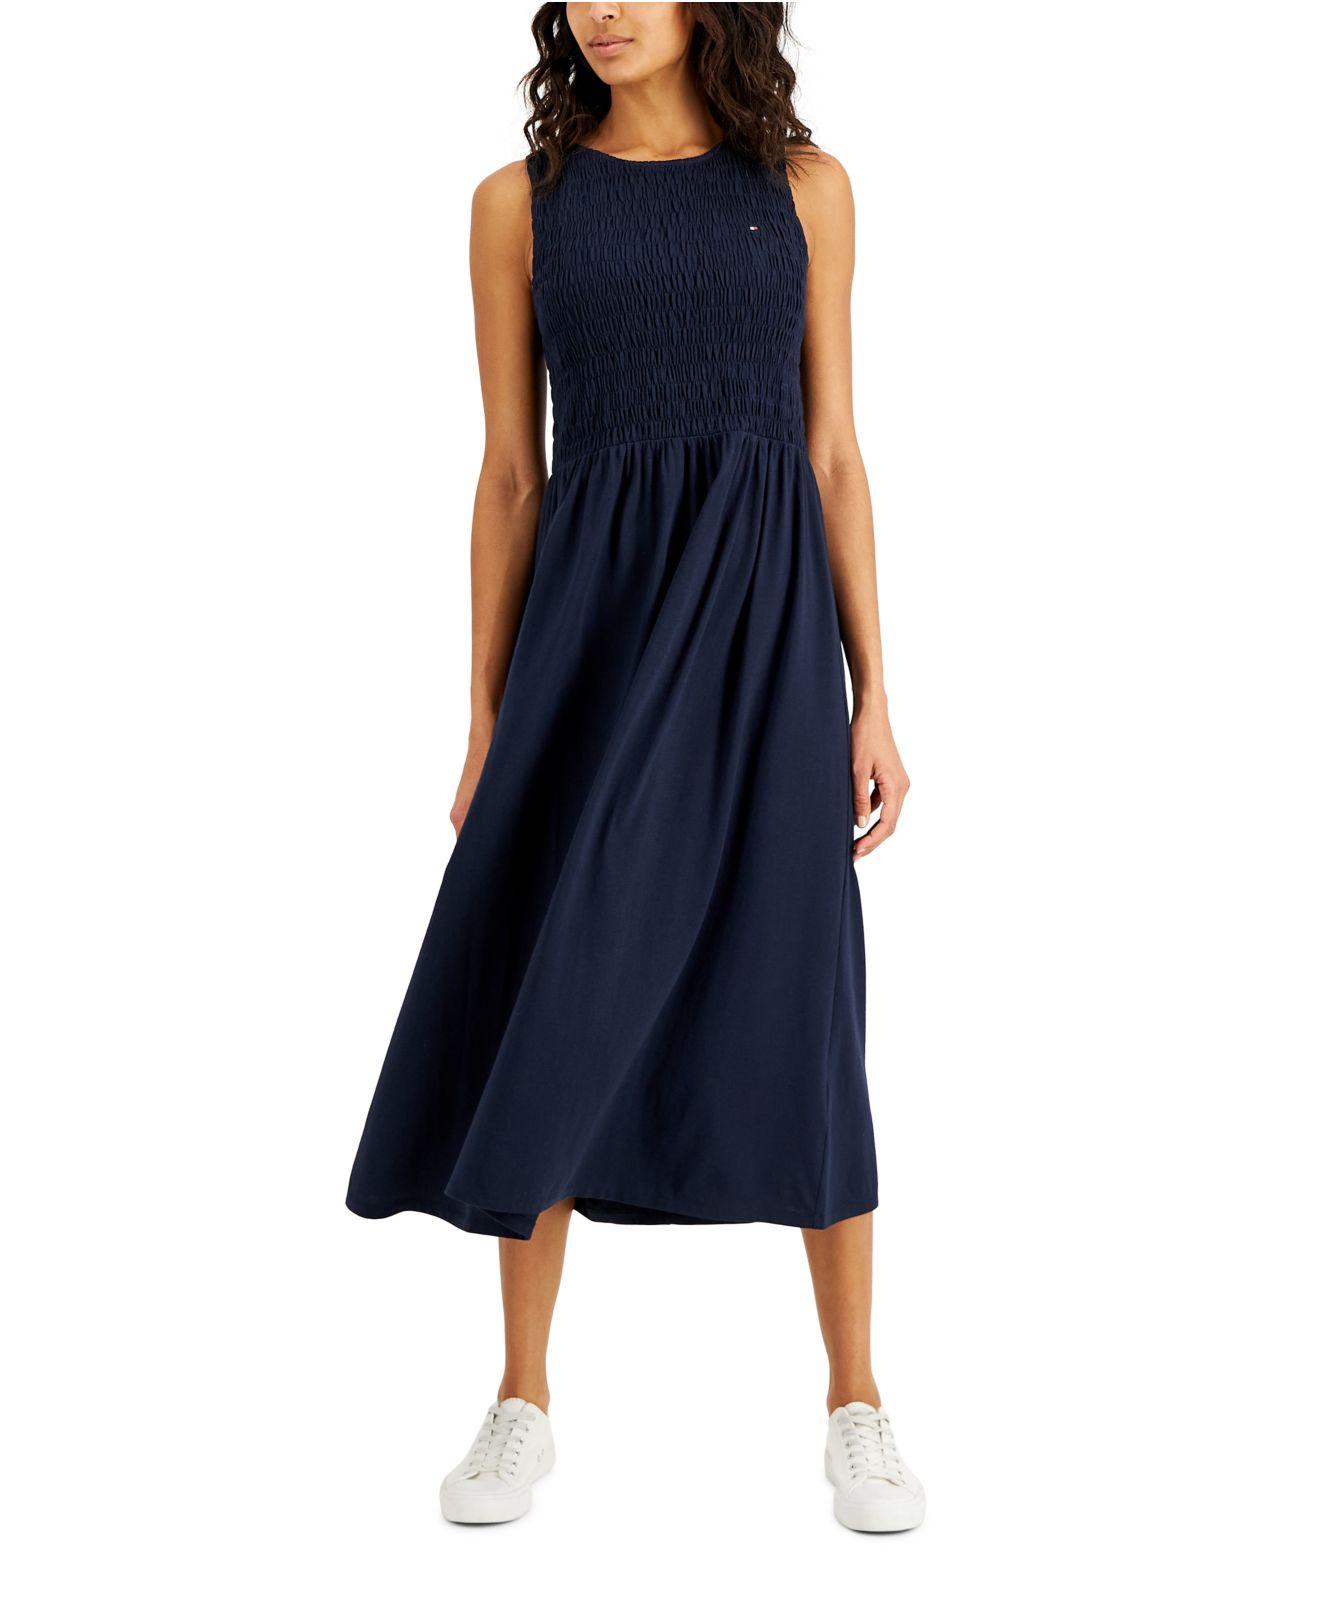 Tommy Hilfiger Smocked Sleeveless Dress in Blue | Lyst